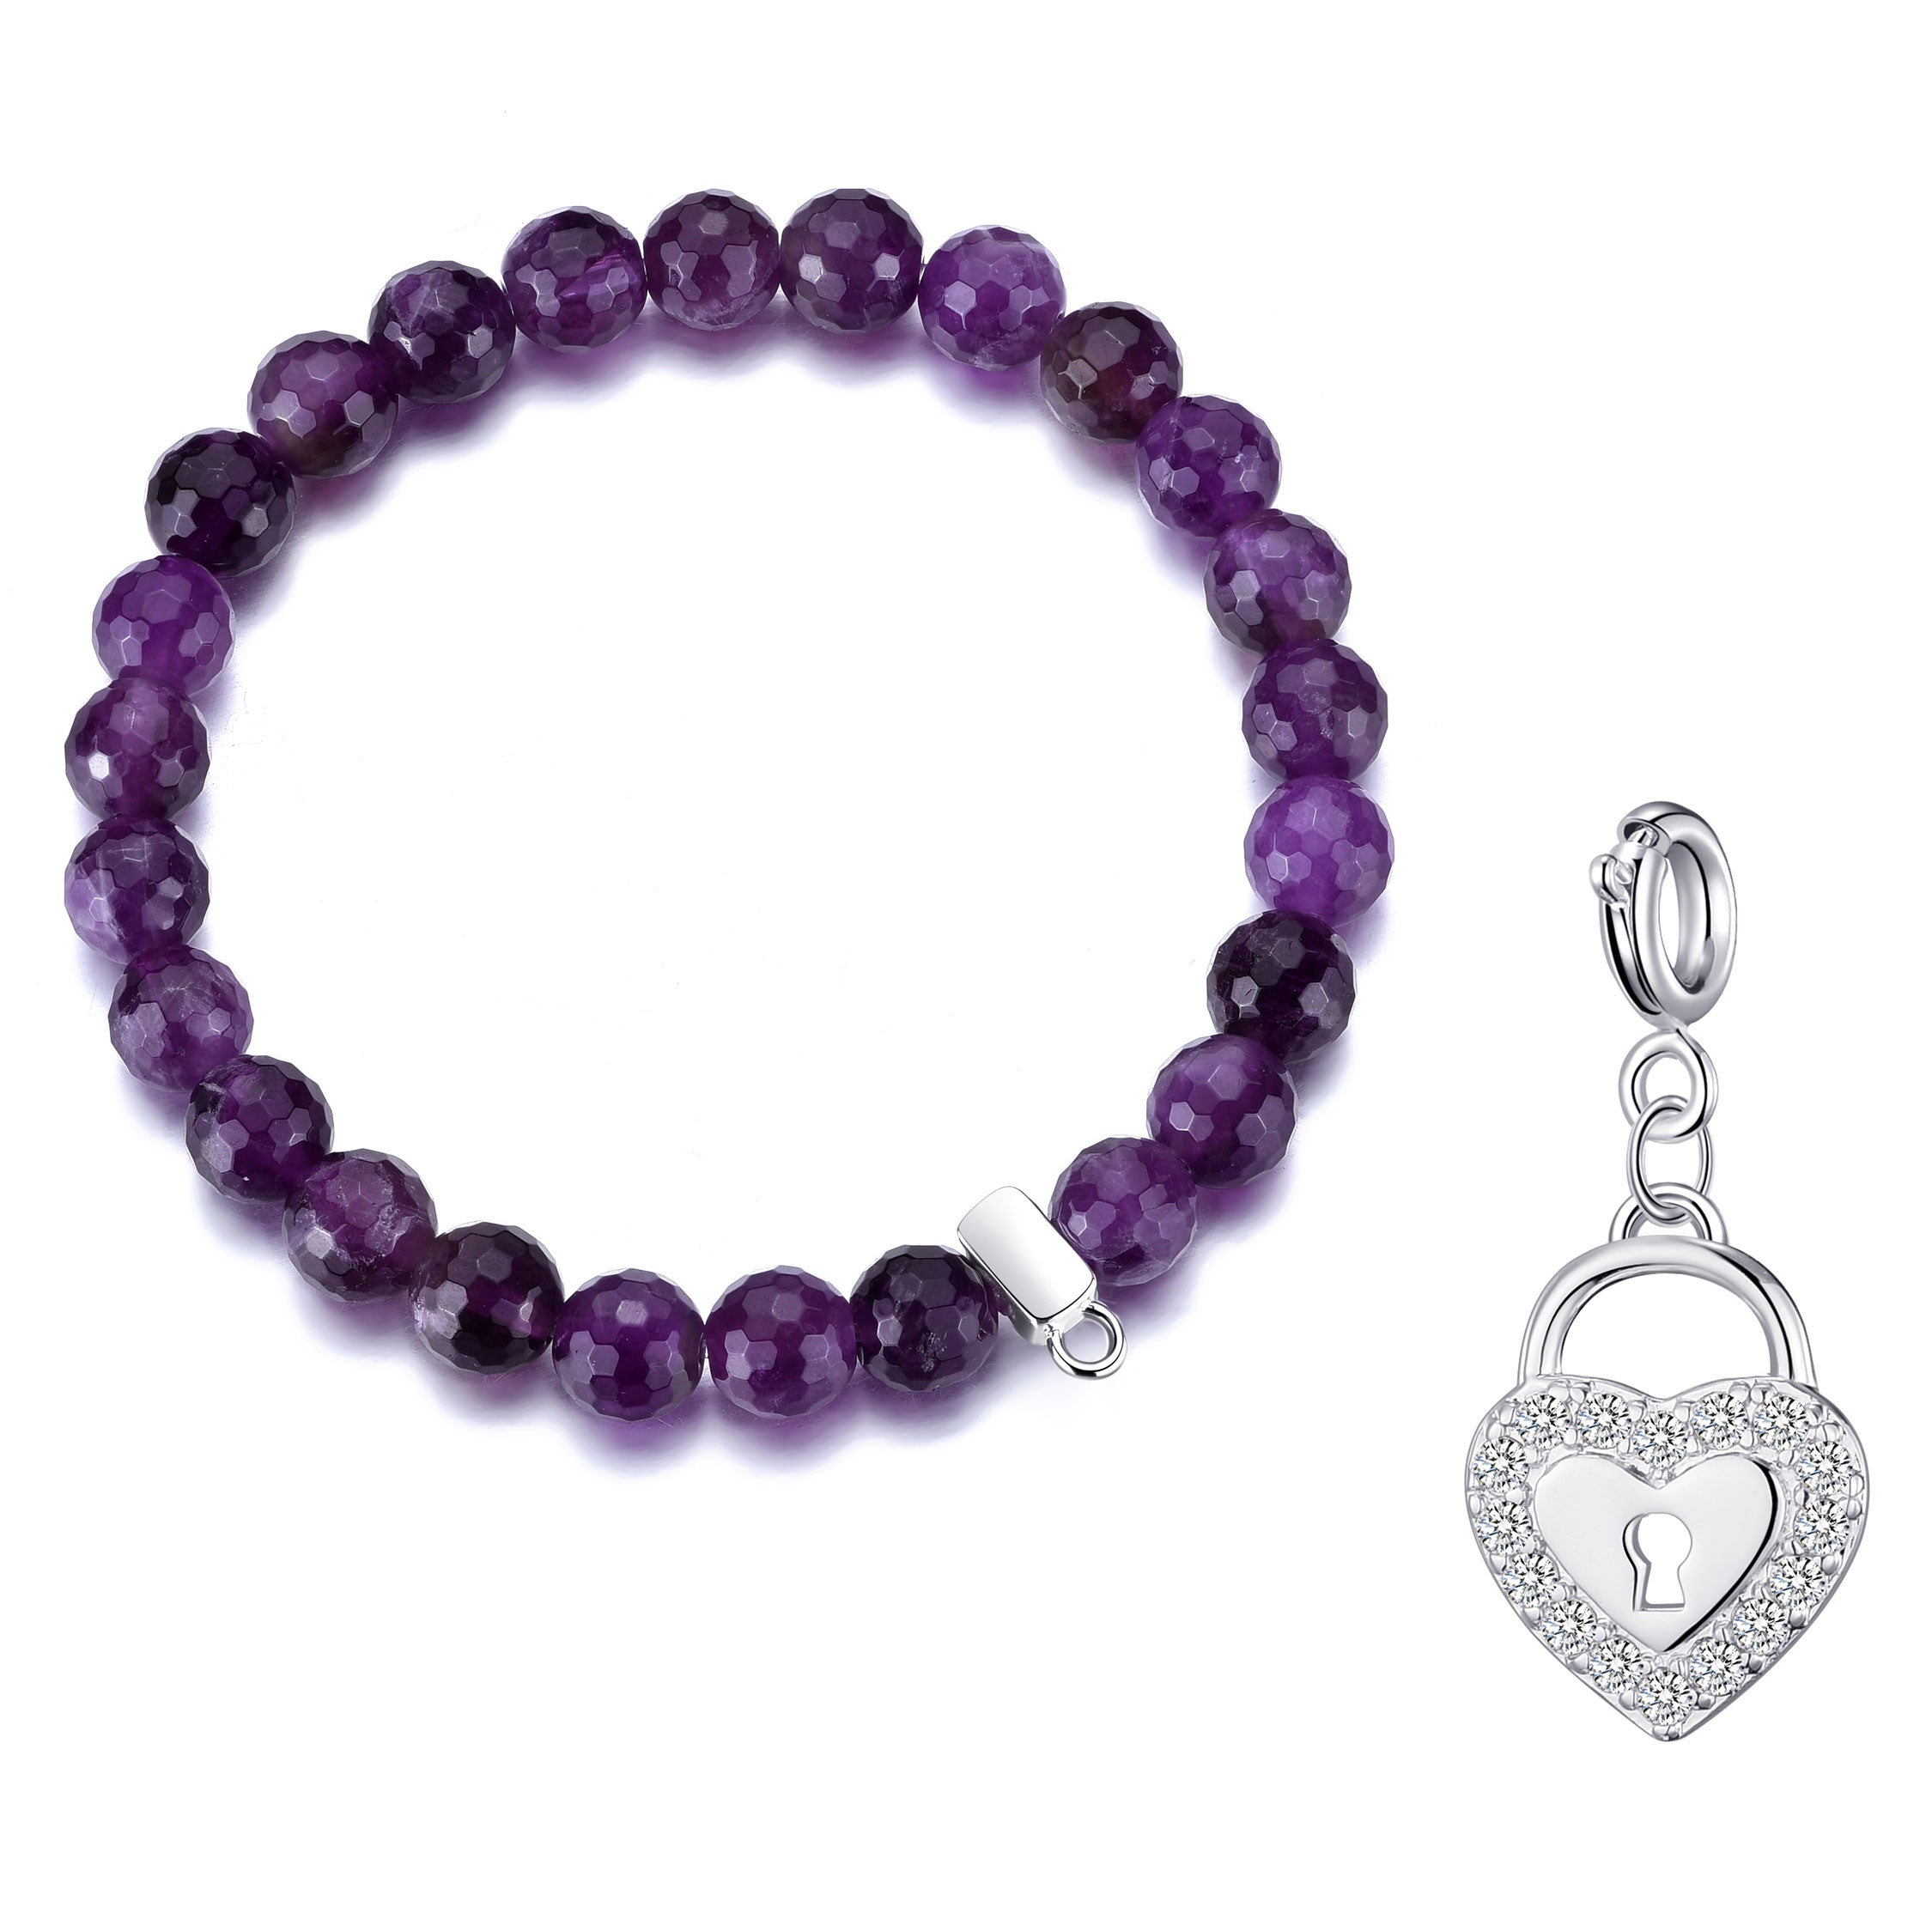 Faceted Amethyst Gemstone Bracelet with Charm Created with Zircondia® Crystals